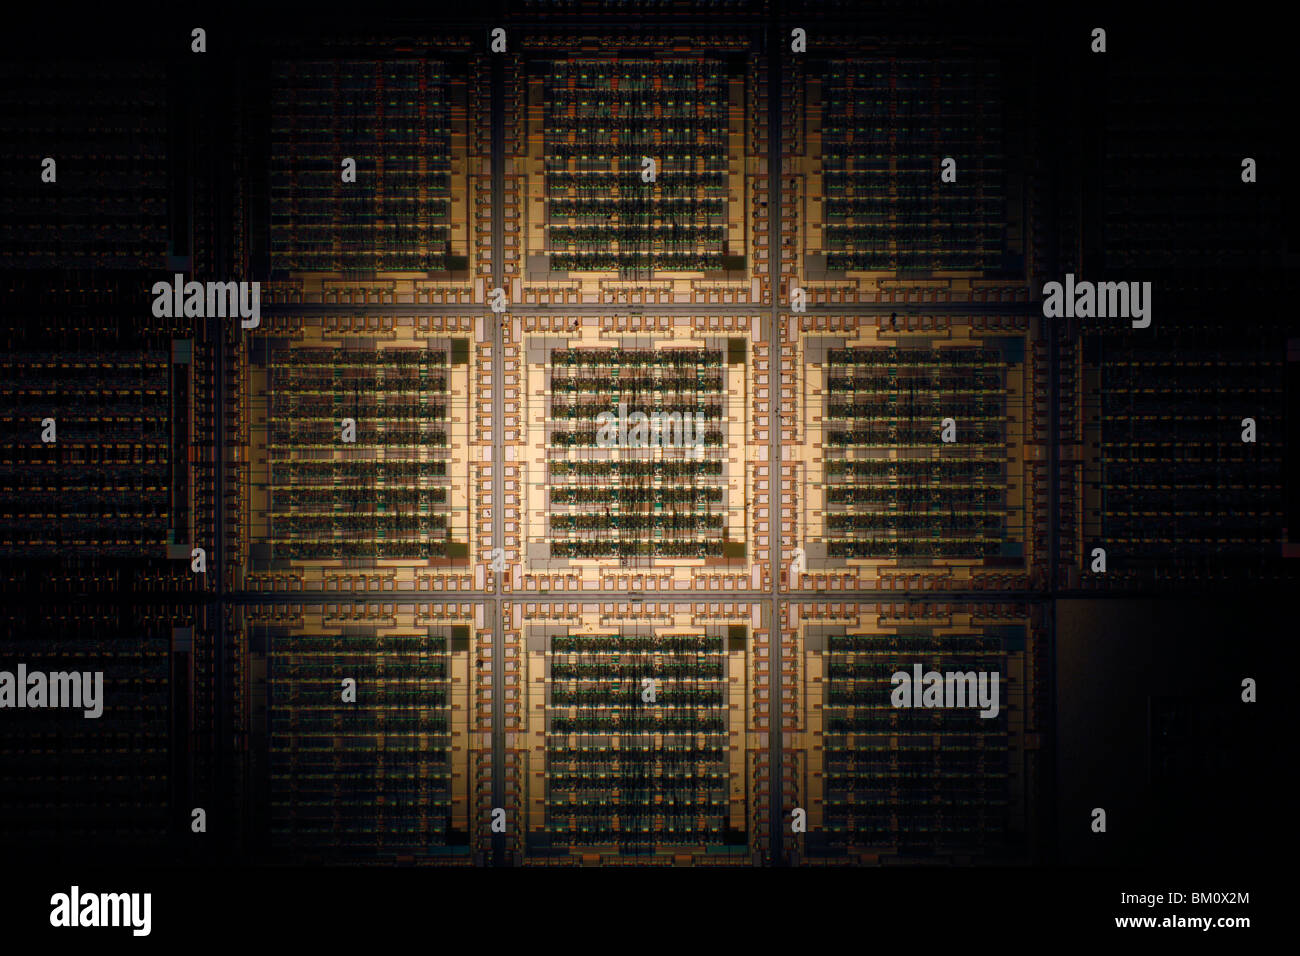 Silicon wafer detail showing printed circuits Stock Photo